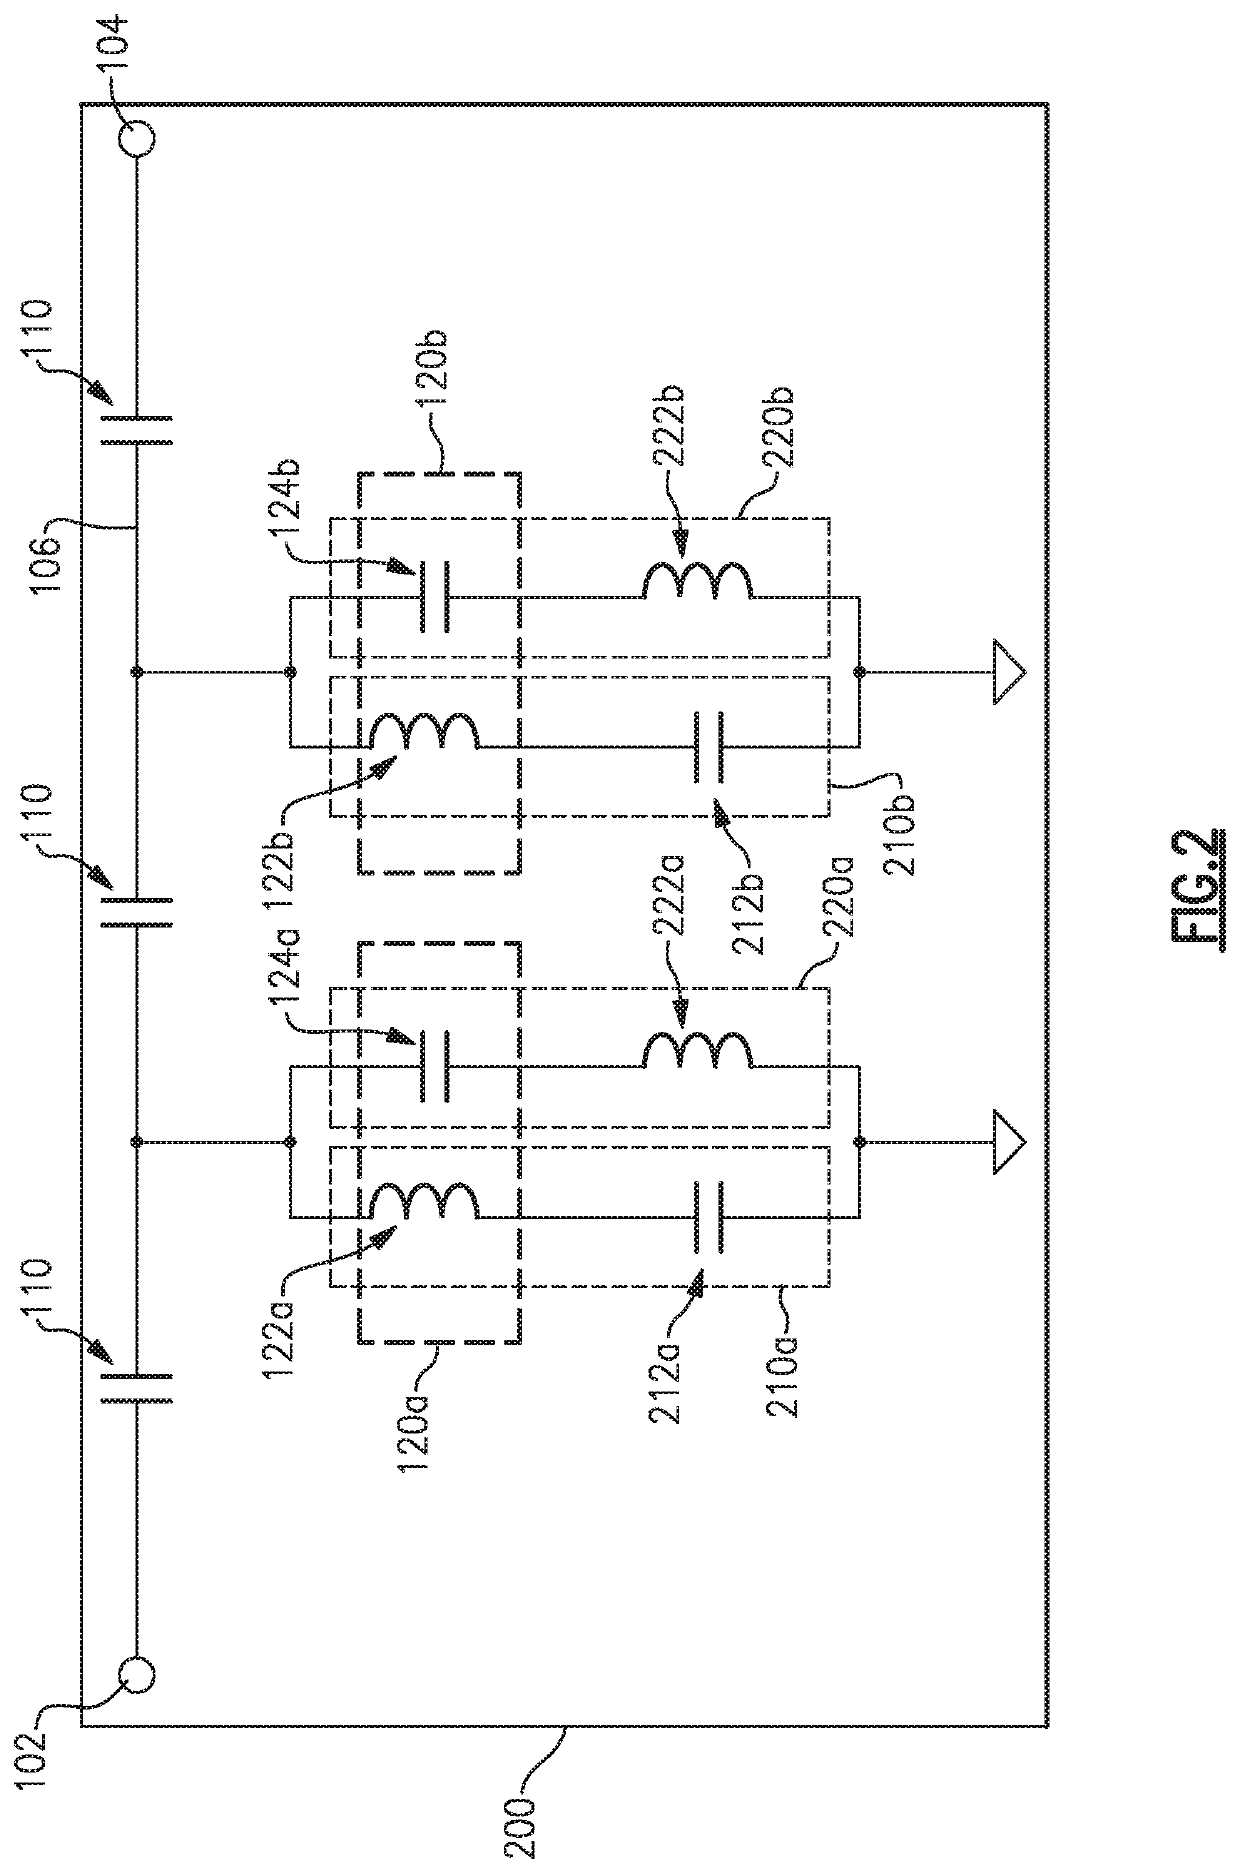 Capacitive-coupled bandpass filter